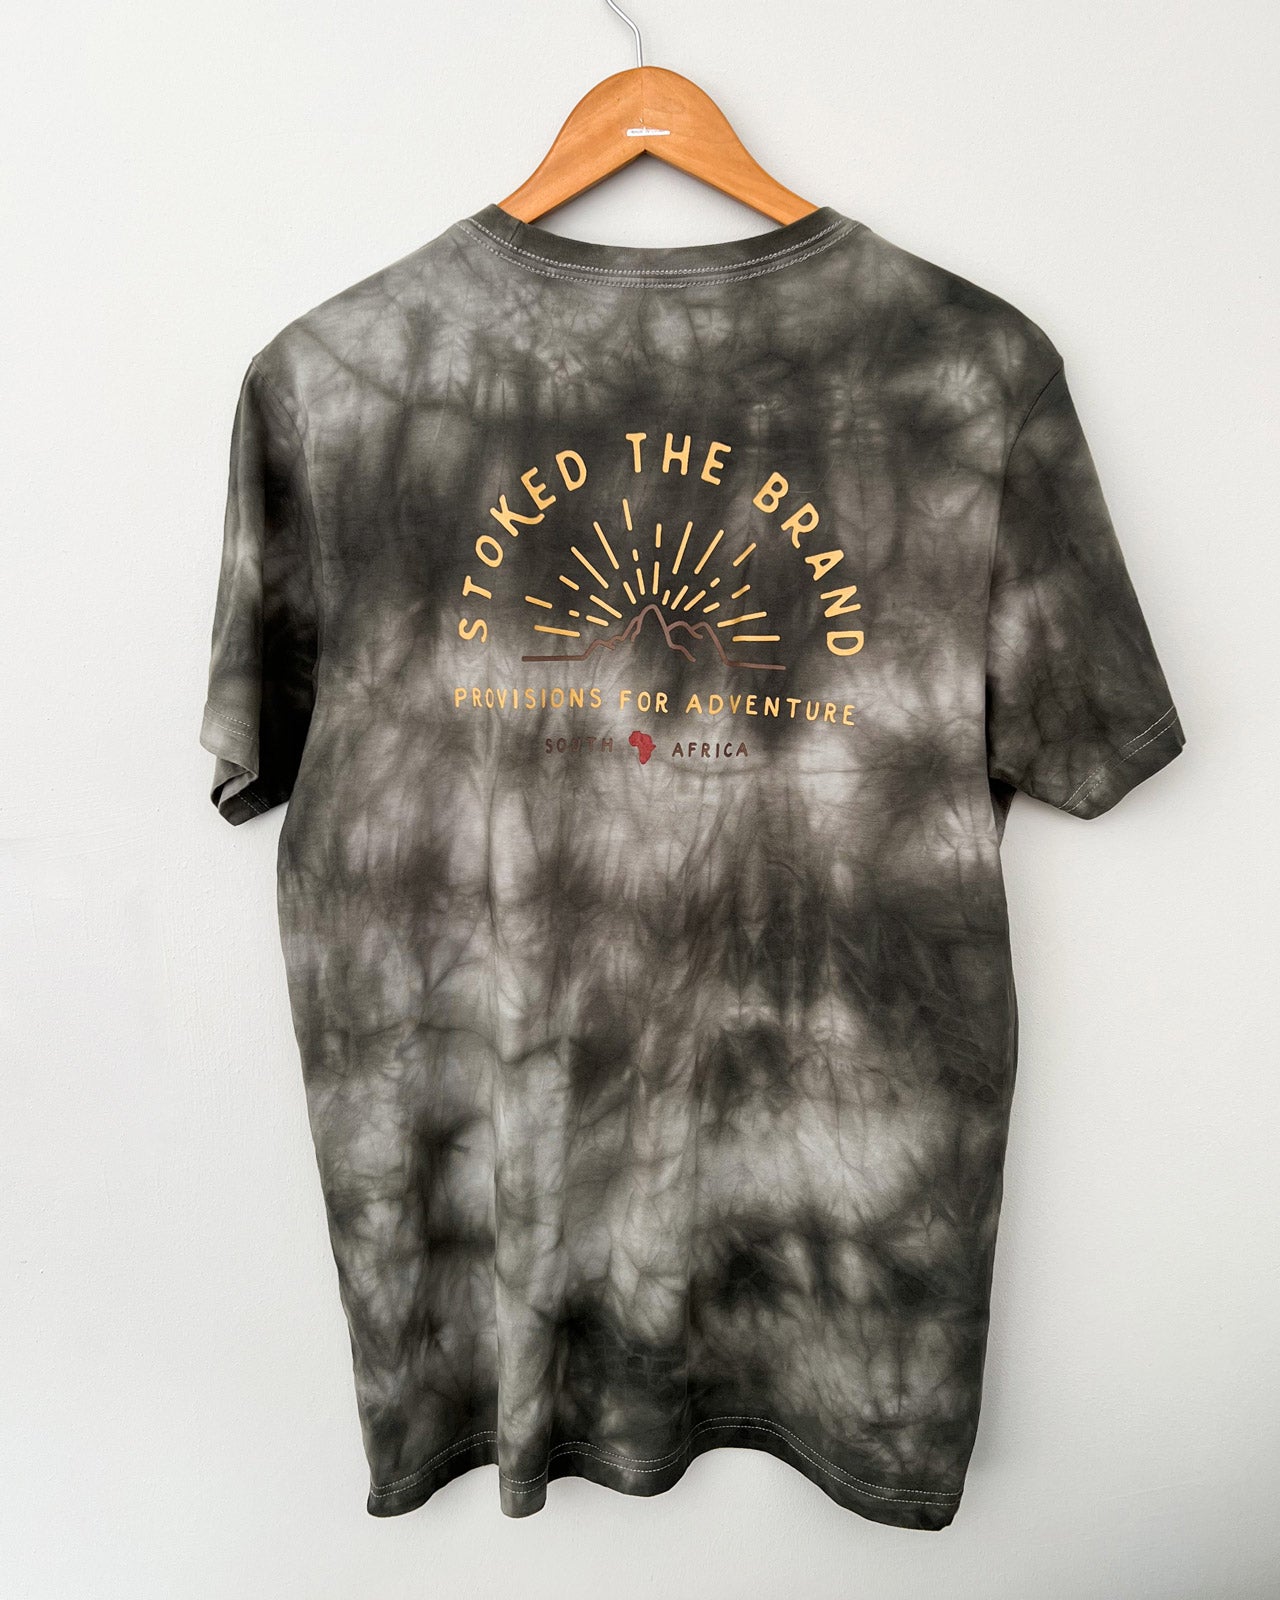 Washed Dye Black Stoked Provisions T-Shirt - Stokedthebrand. Lifestyle products for outdoor adventures. Made in South Africa